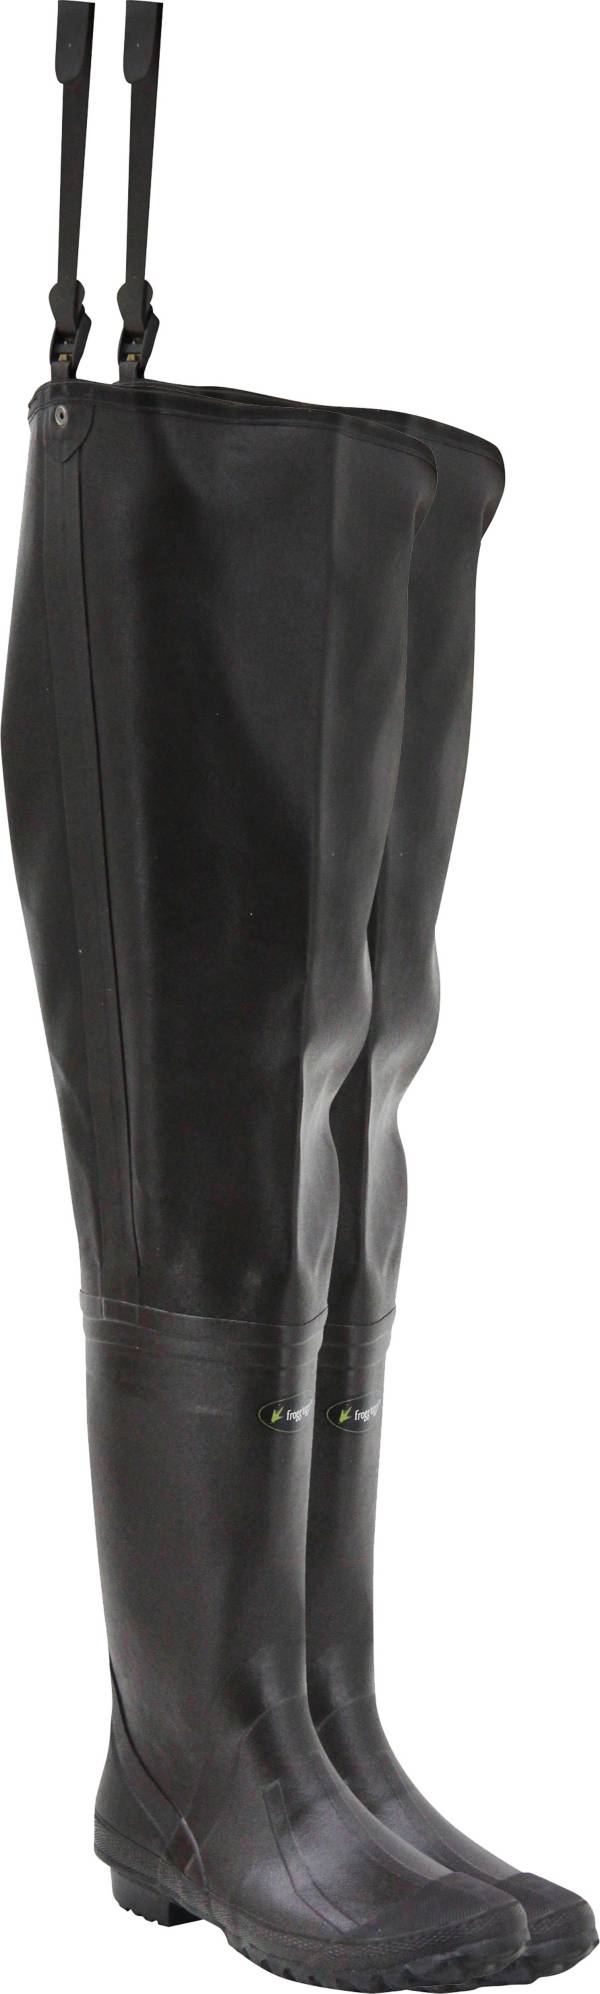 frogg toggs Youth Rubber Hip Waders product image